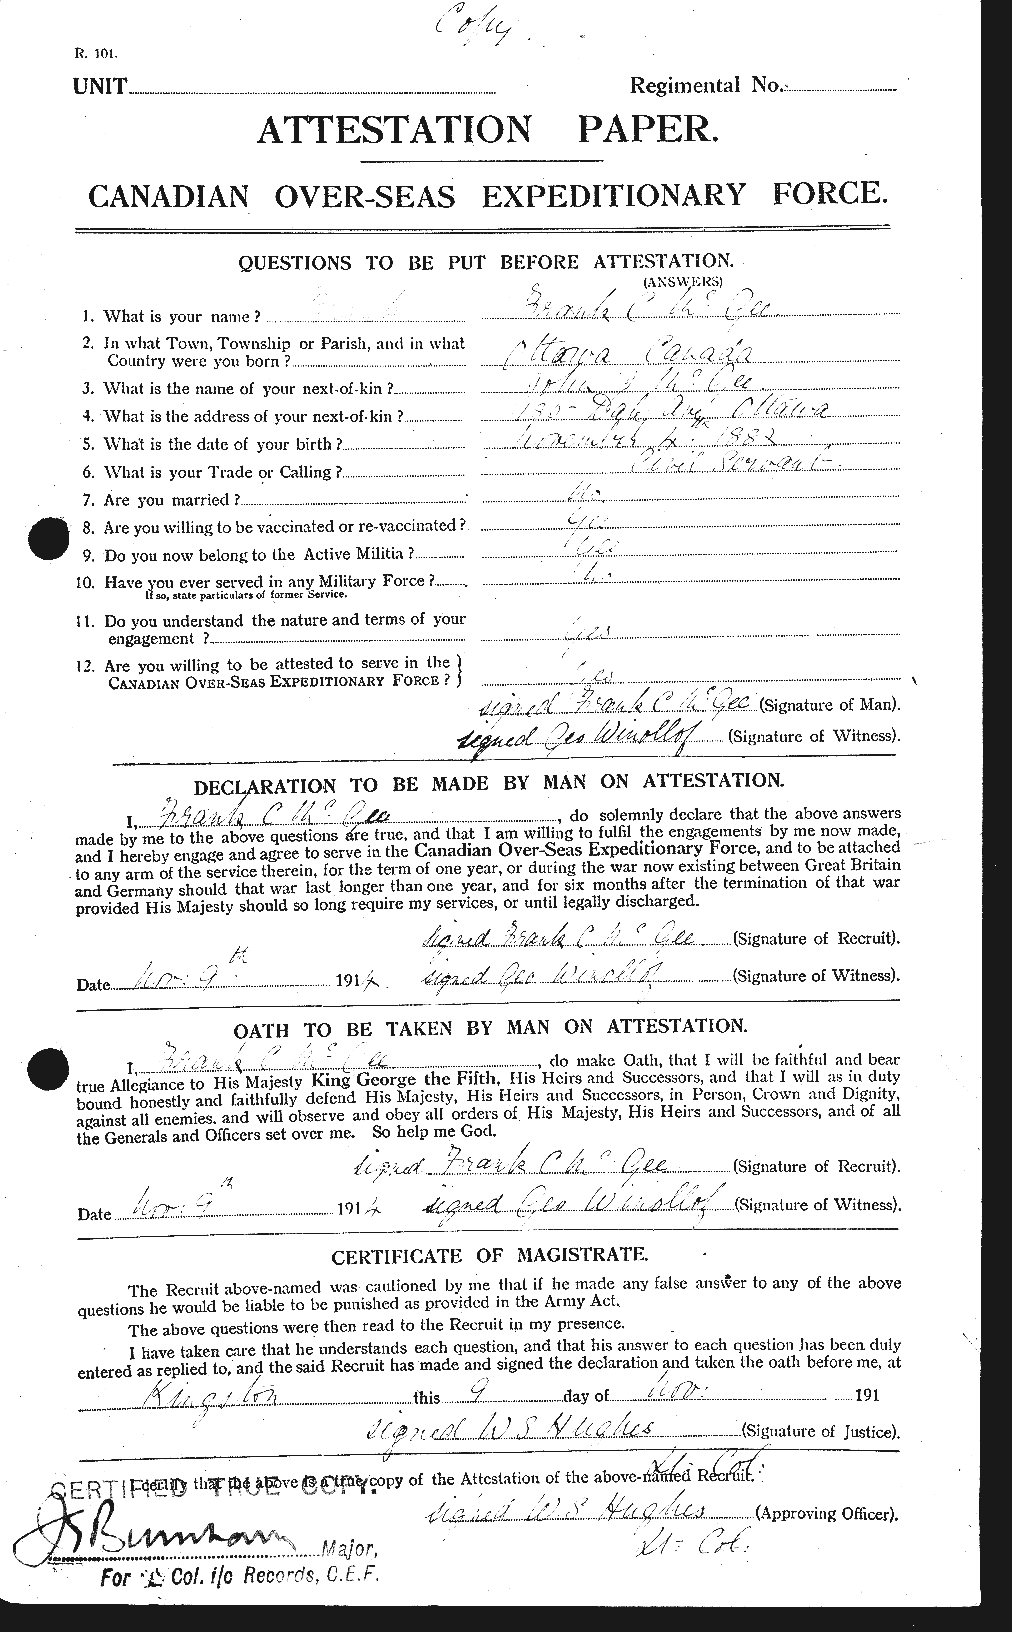 Personnel Records of the First World War - CEF 520440a